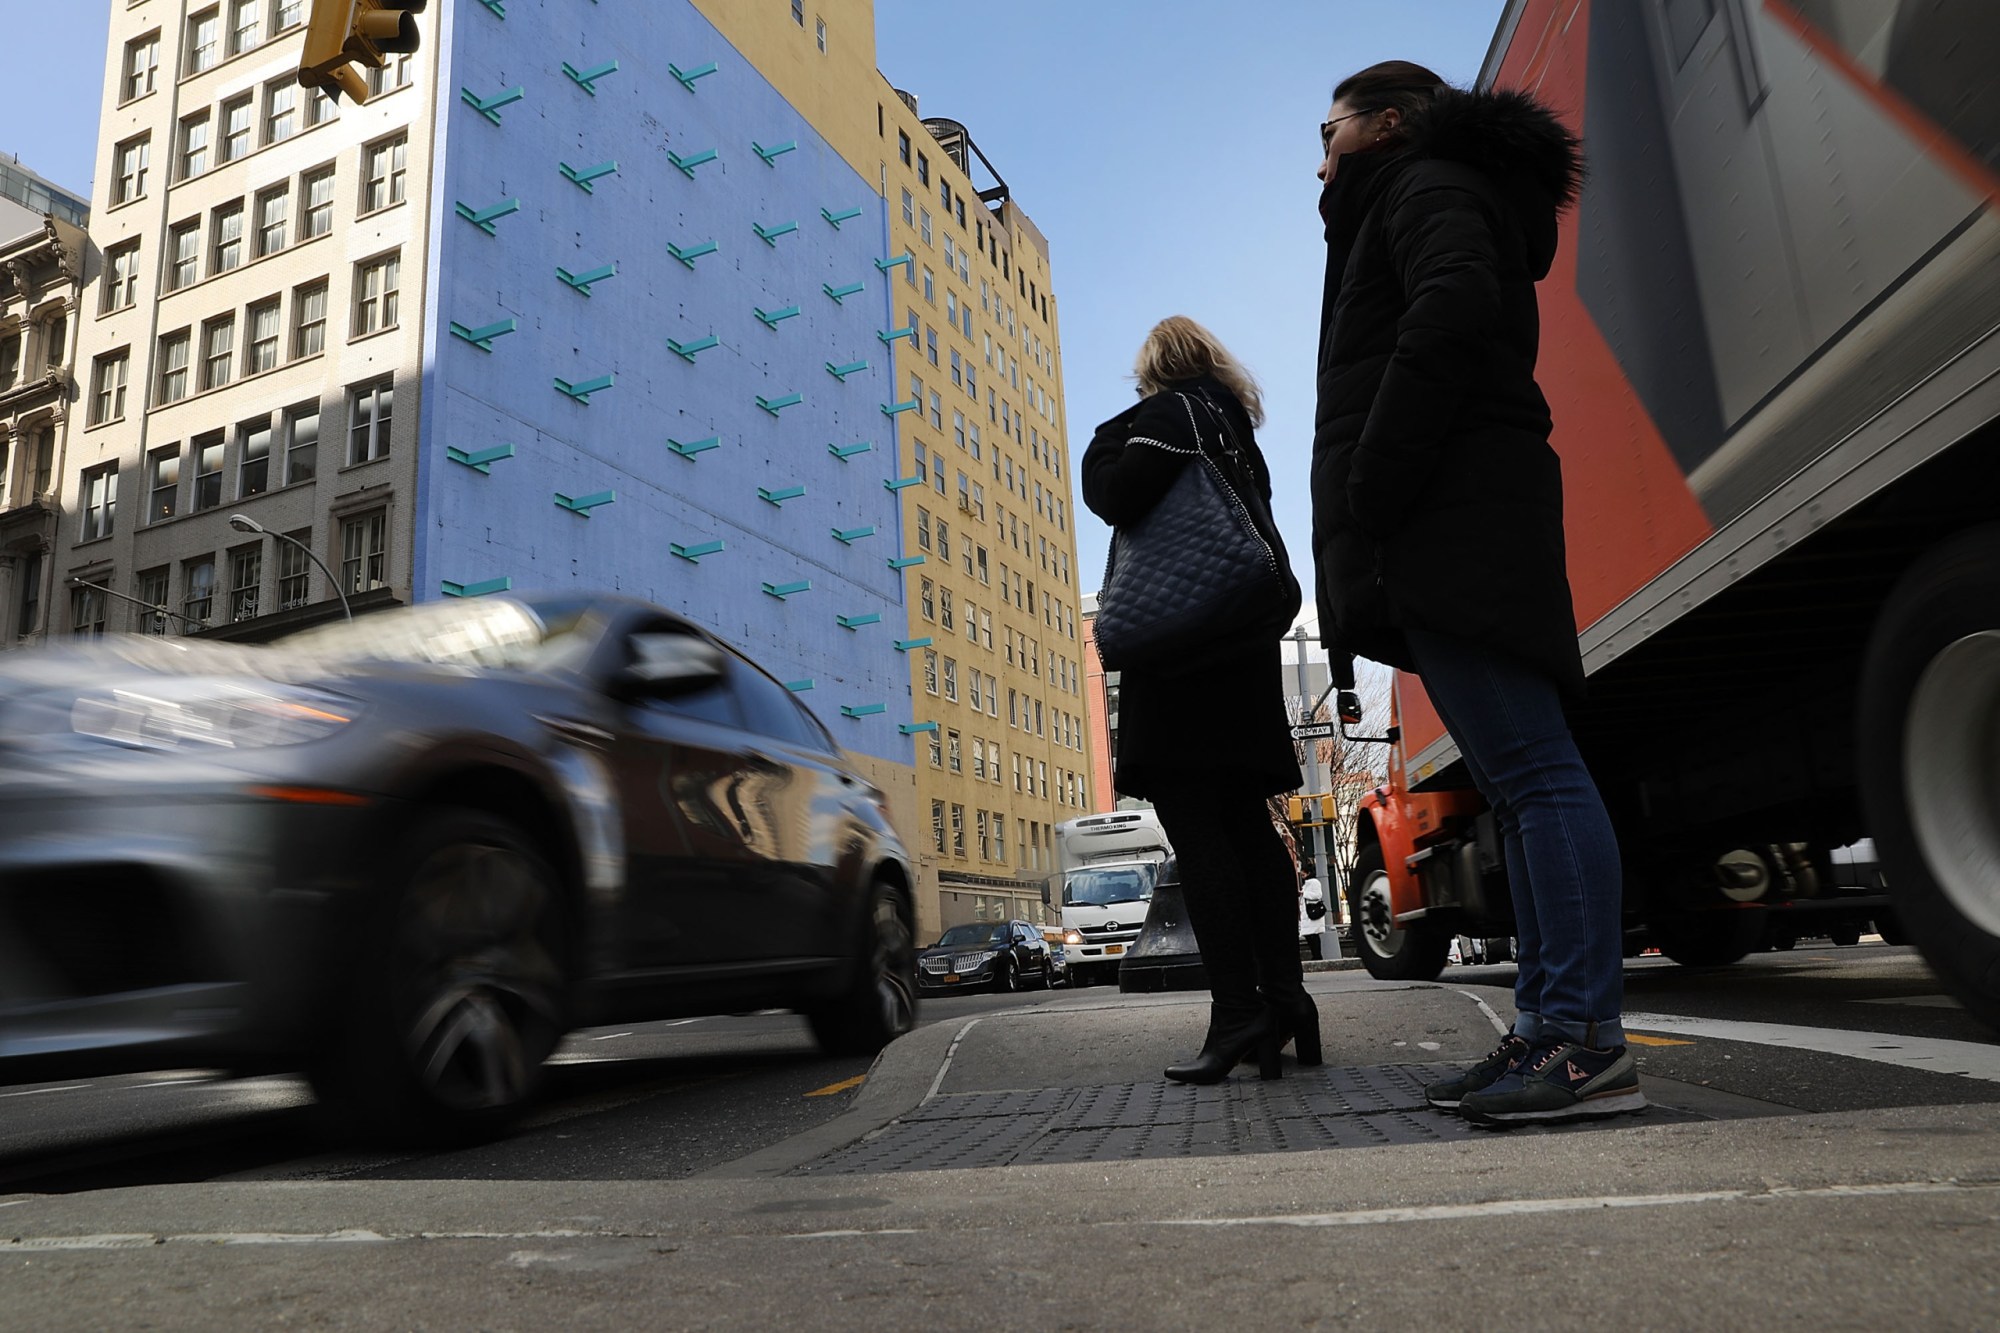 NEW YORK, NY - MARCH 06:  Pedestrians walk along a Manhattan street on March 6, 2018 in New York City. A new report by the Governors Highway Safety Association estimates the number of pedestrian deaths last year was 6,000 nationwide, a 33-year high. The report highlights a number of factors for the continued increase including distracted drivers using mobile devices and a larger number of cars on the road due to an improved economy. Despite an accident yesterday that took the lives of two small children in Brooklyn, New York City has been seeing a steady decline of pedestrian deaths since Mayor Bill de Blasio's Vision Zero initiative.  (Photo by Spencer Platt/Getty Images)